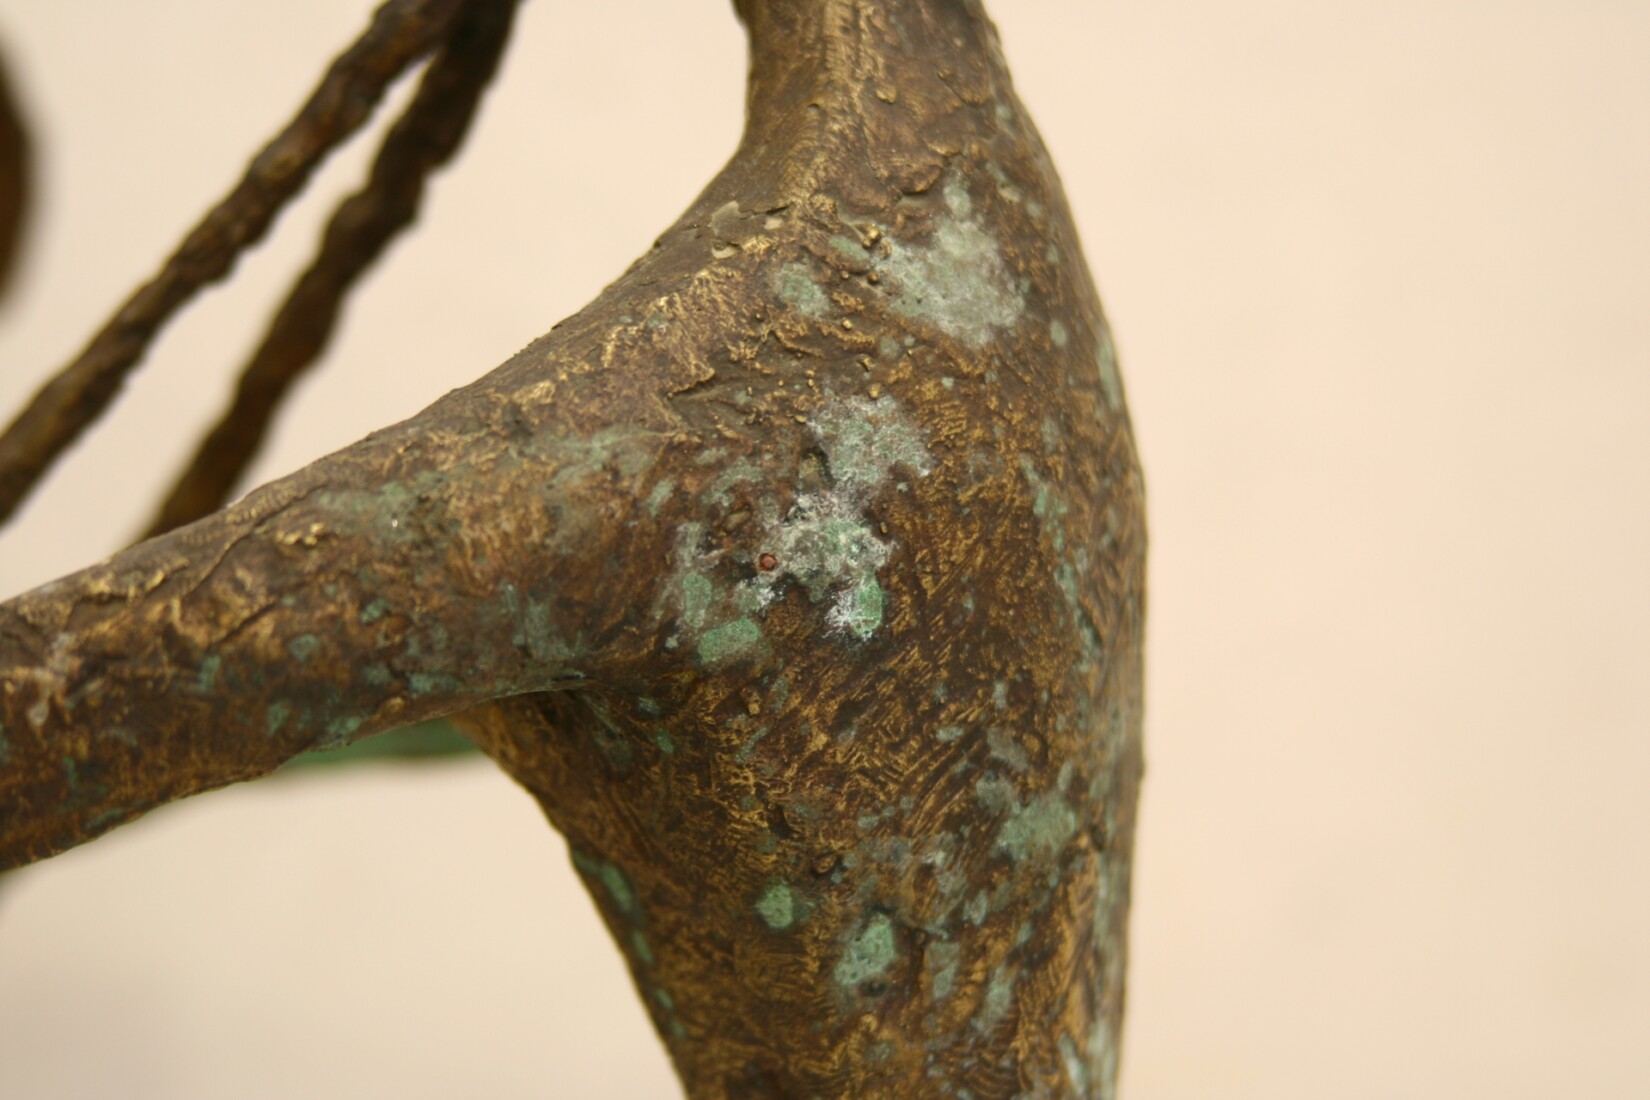 Corrosion products on bronze art work surface